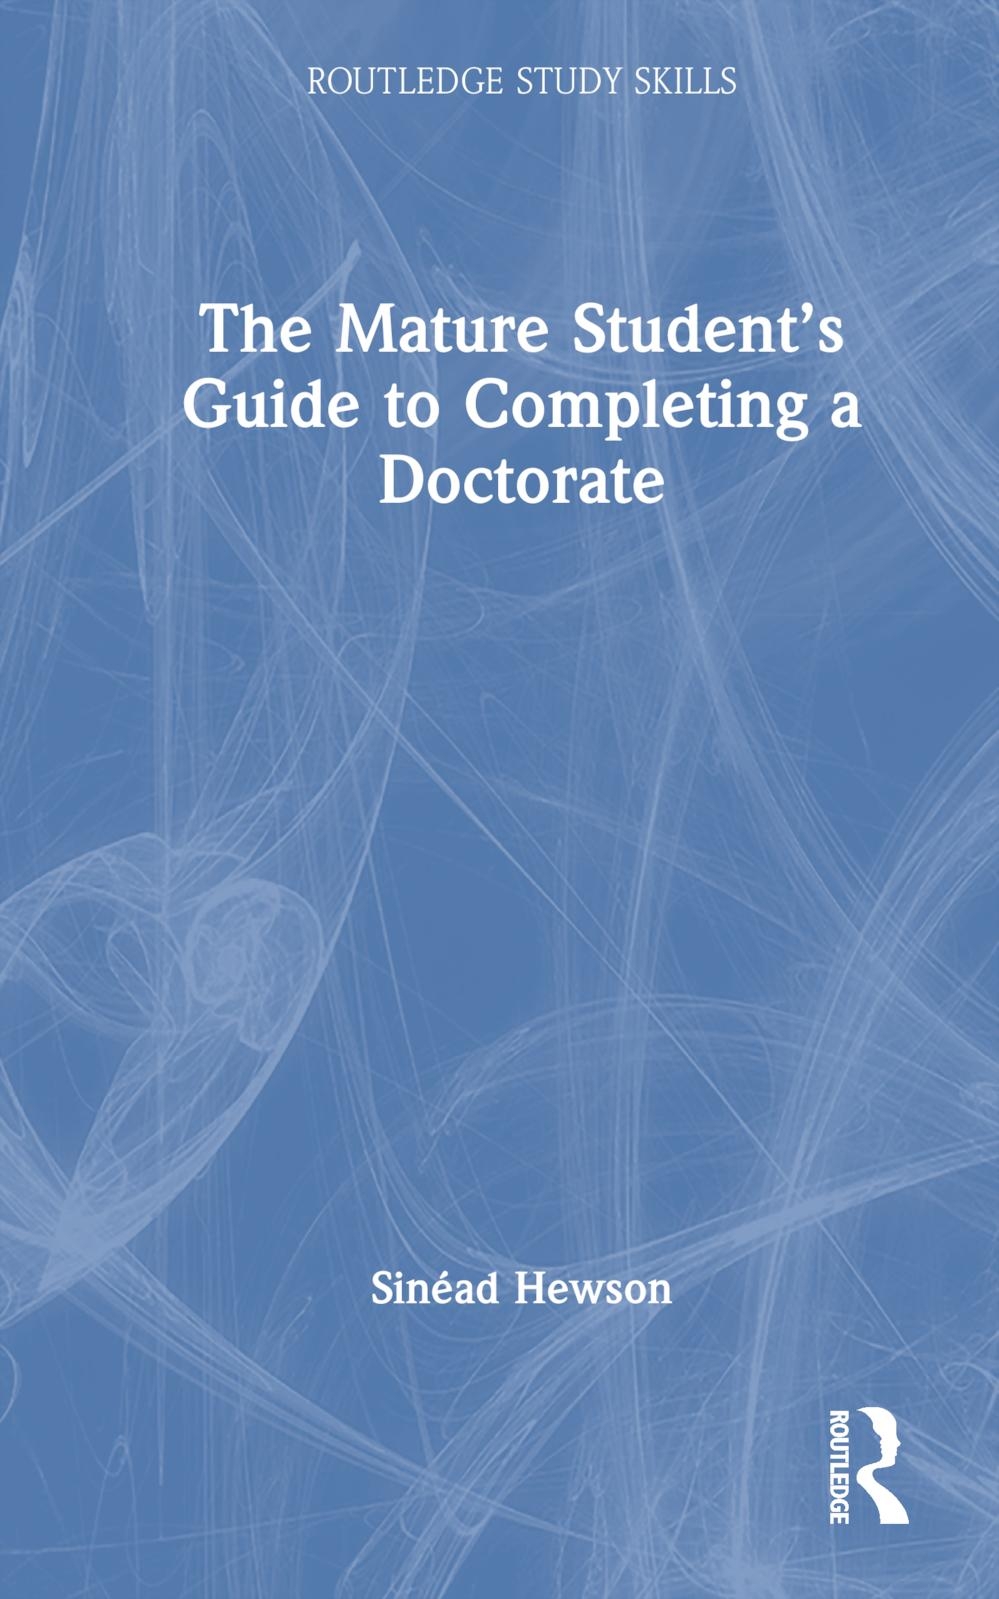 The Mature Student’s Guide to Completing a Doctorate